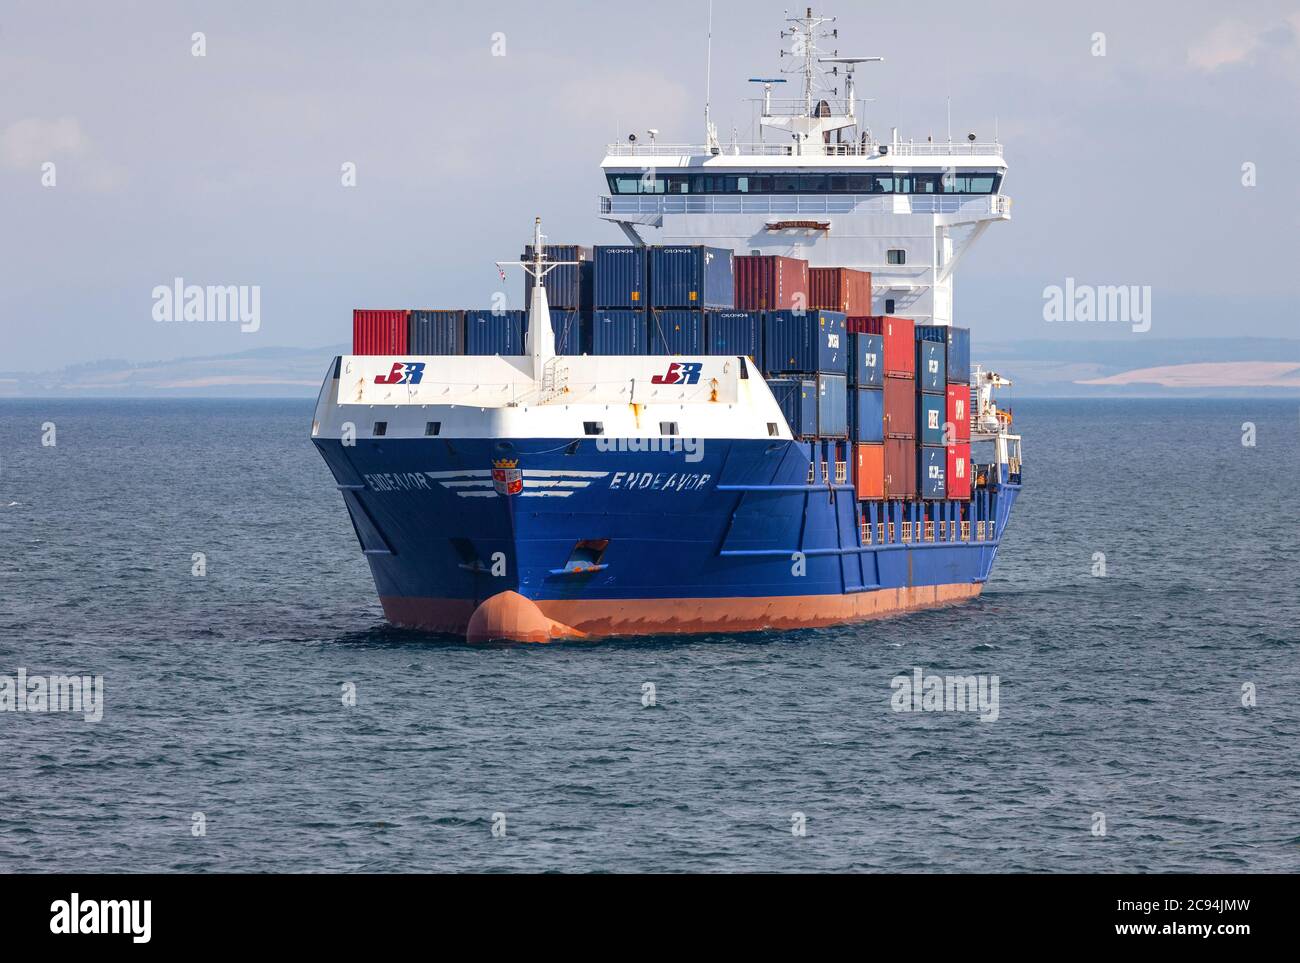 The container ship Endeavor, owned by the Dutch company JR Shipping Group, in the Firth of Clyde in south-west Scotland. Stock Photo